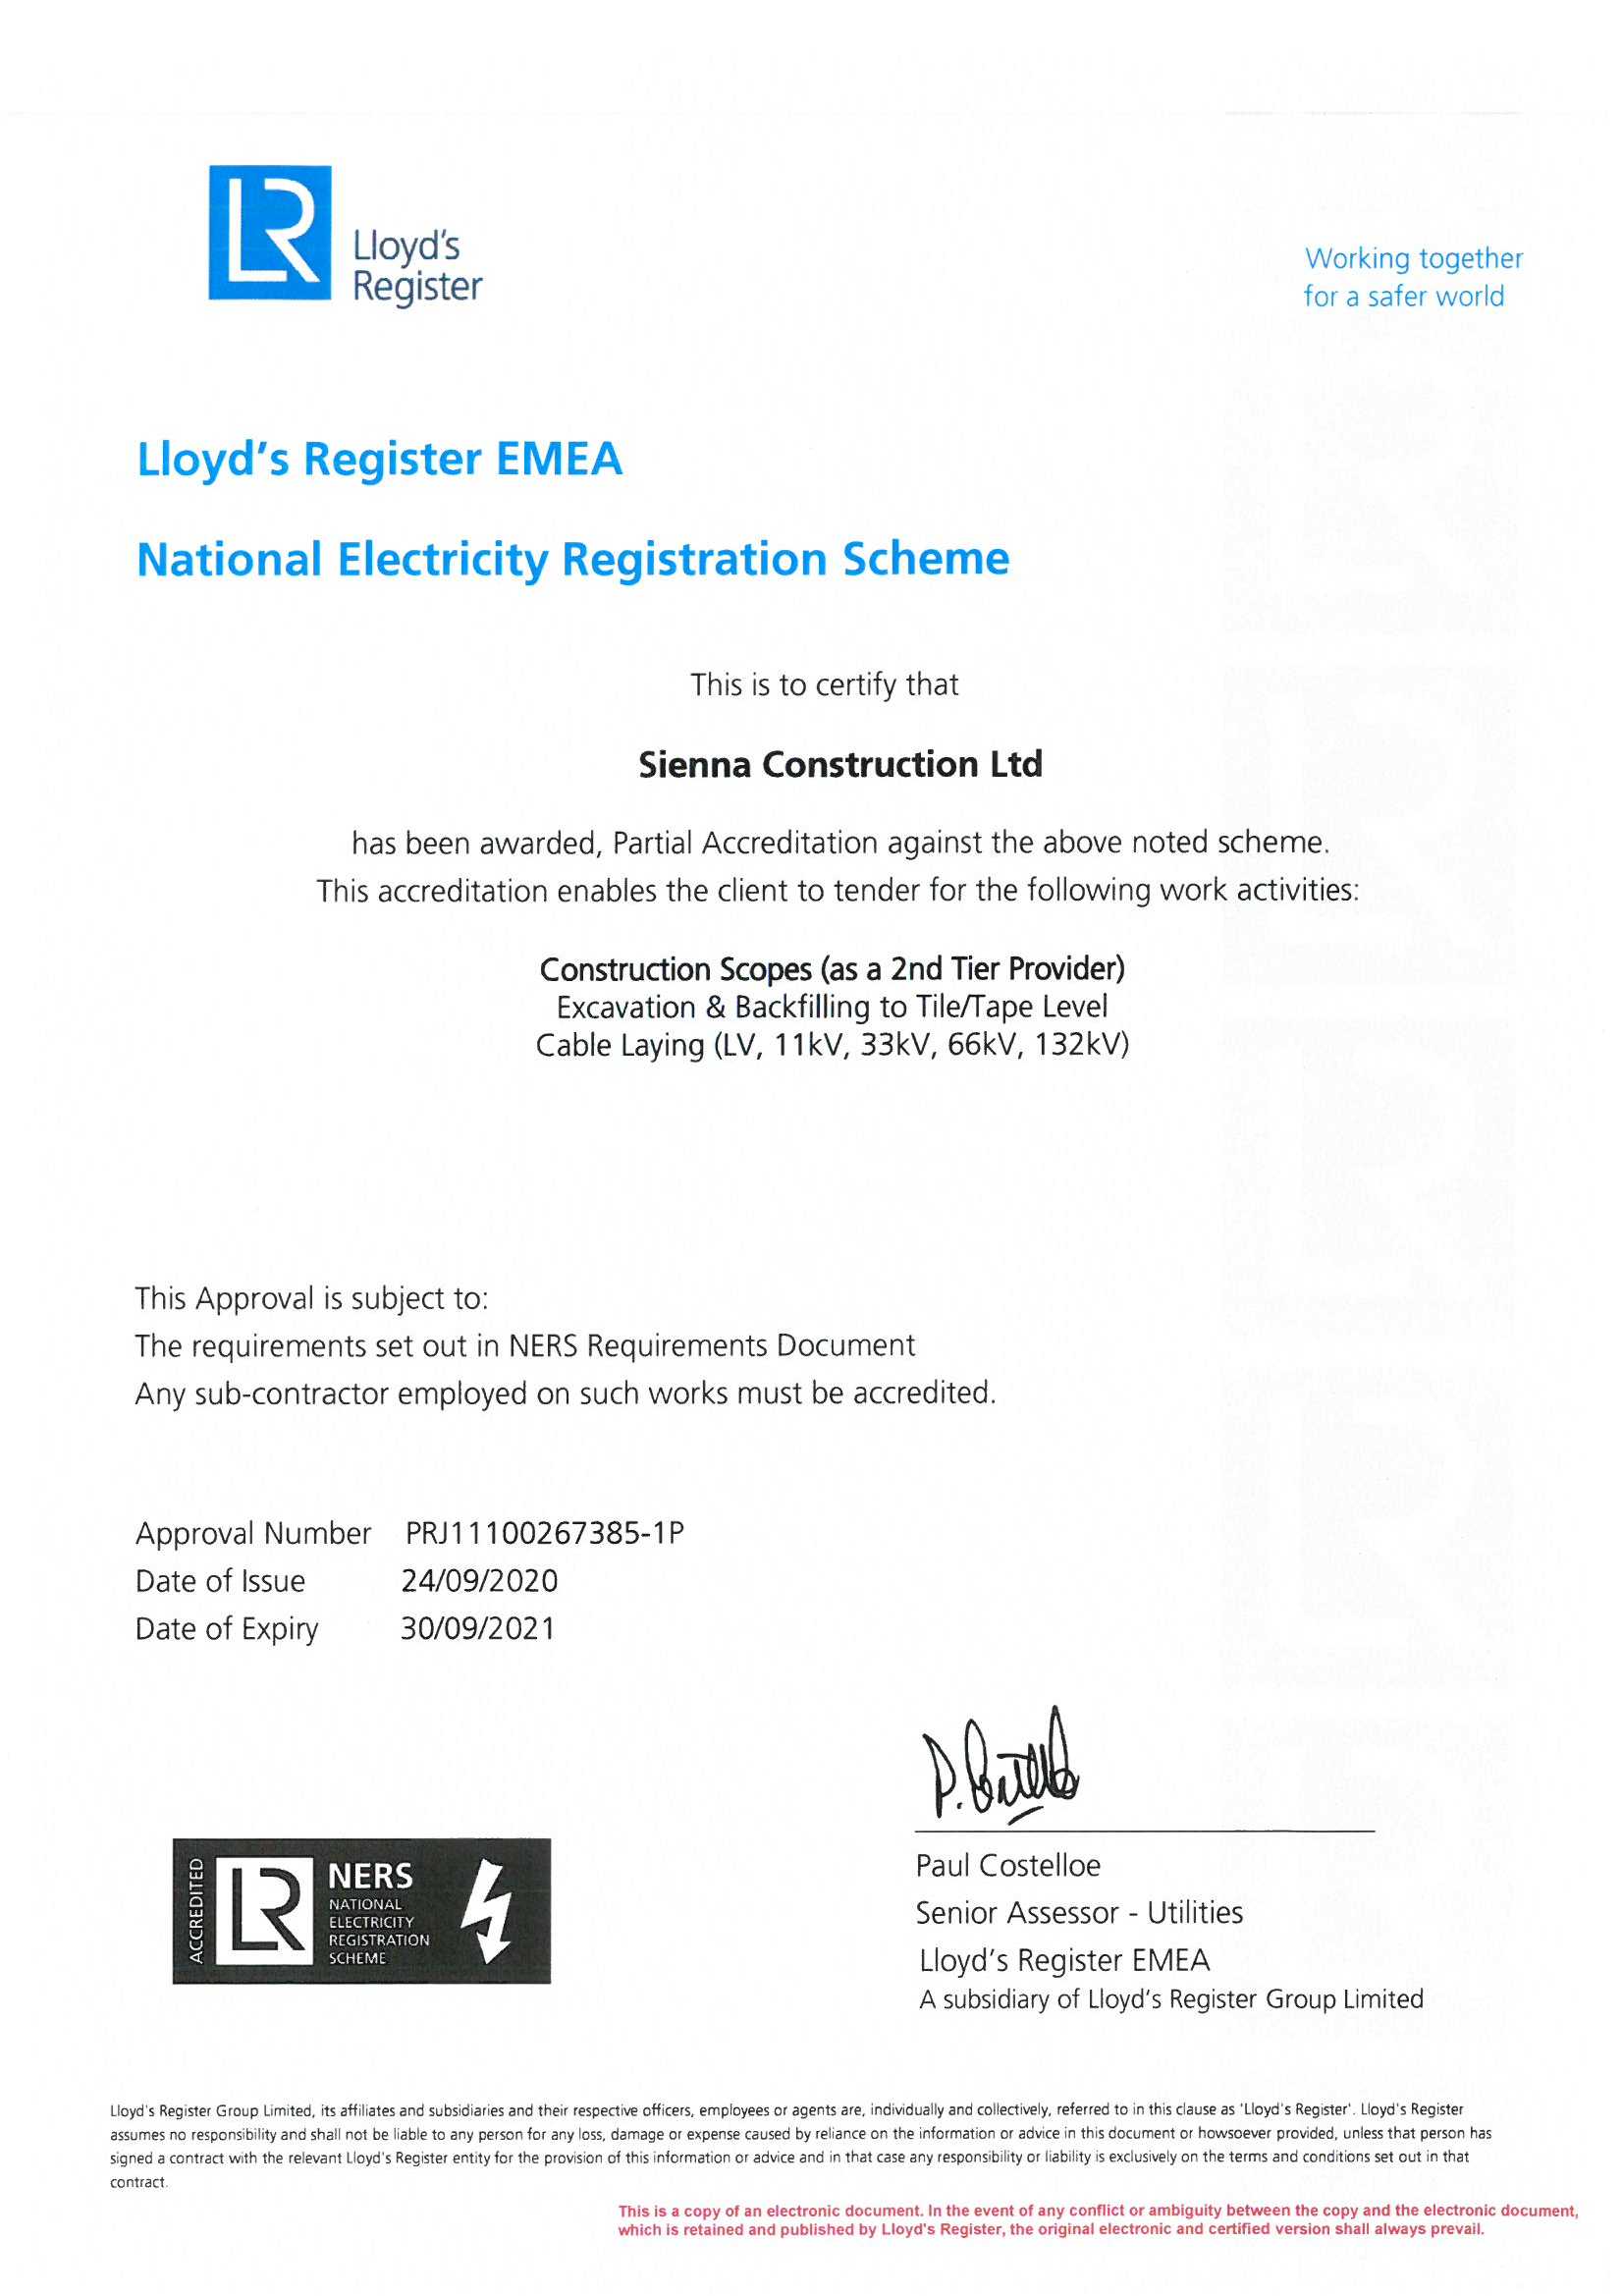 NERS certificate